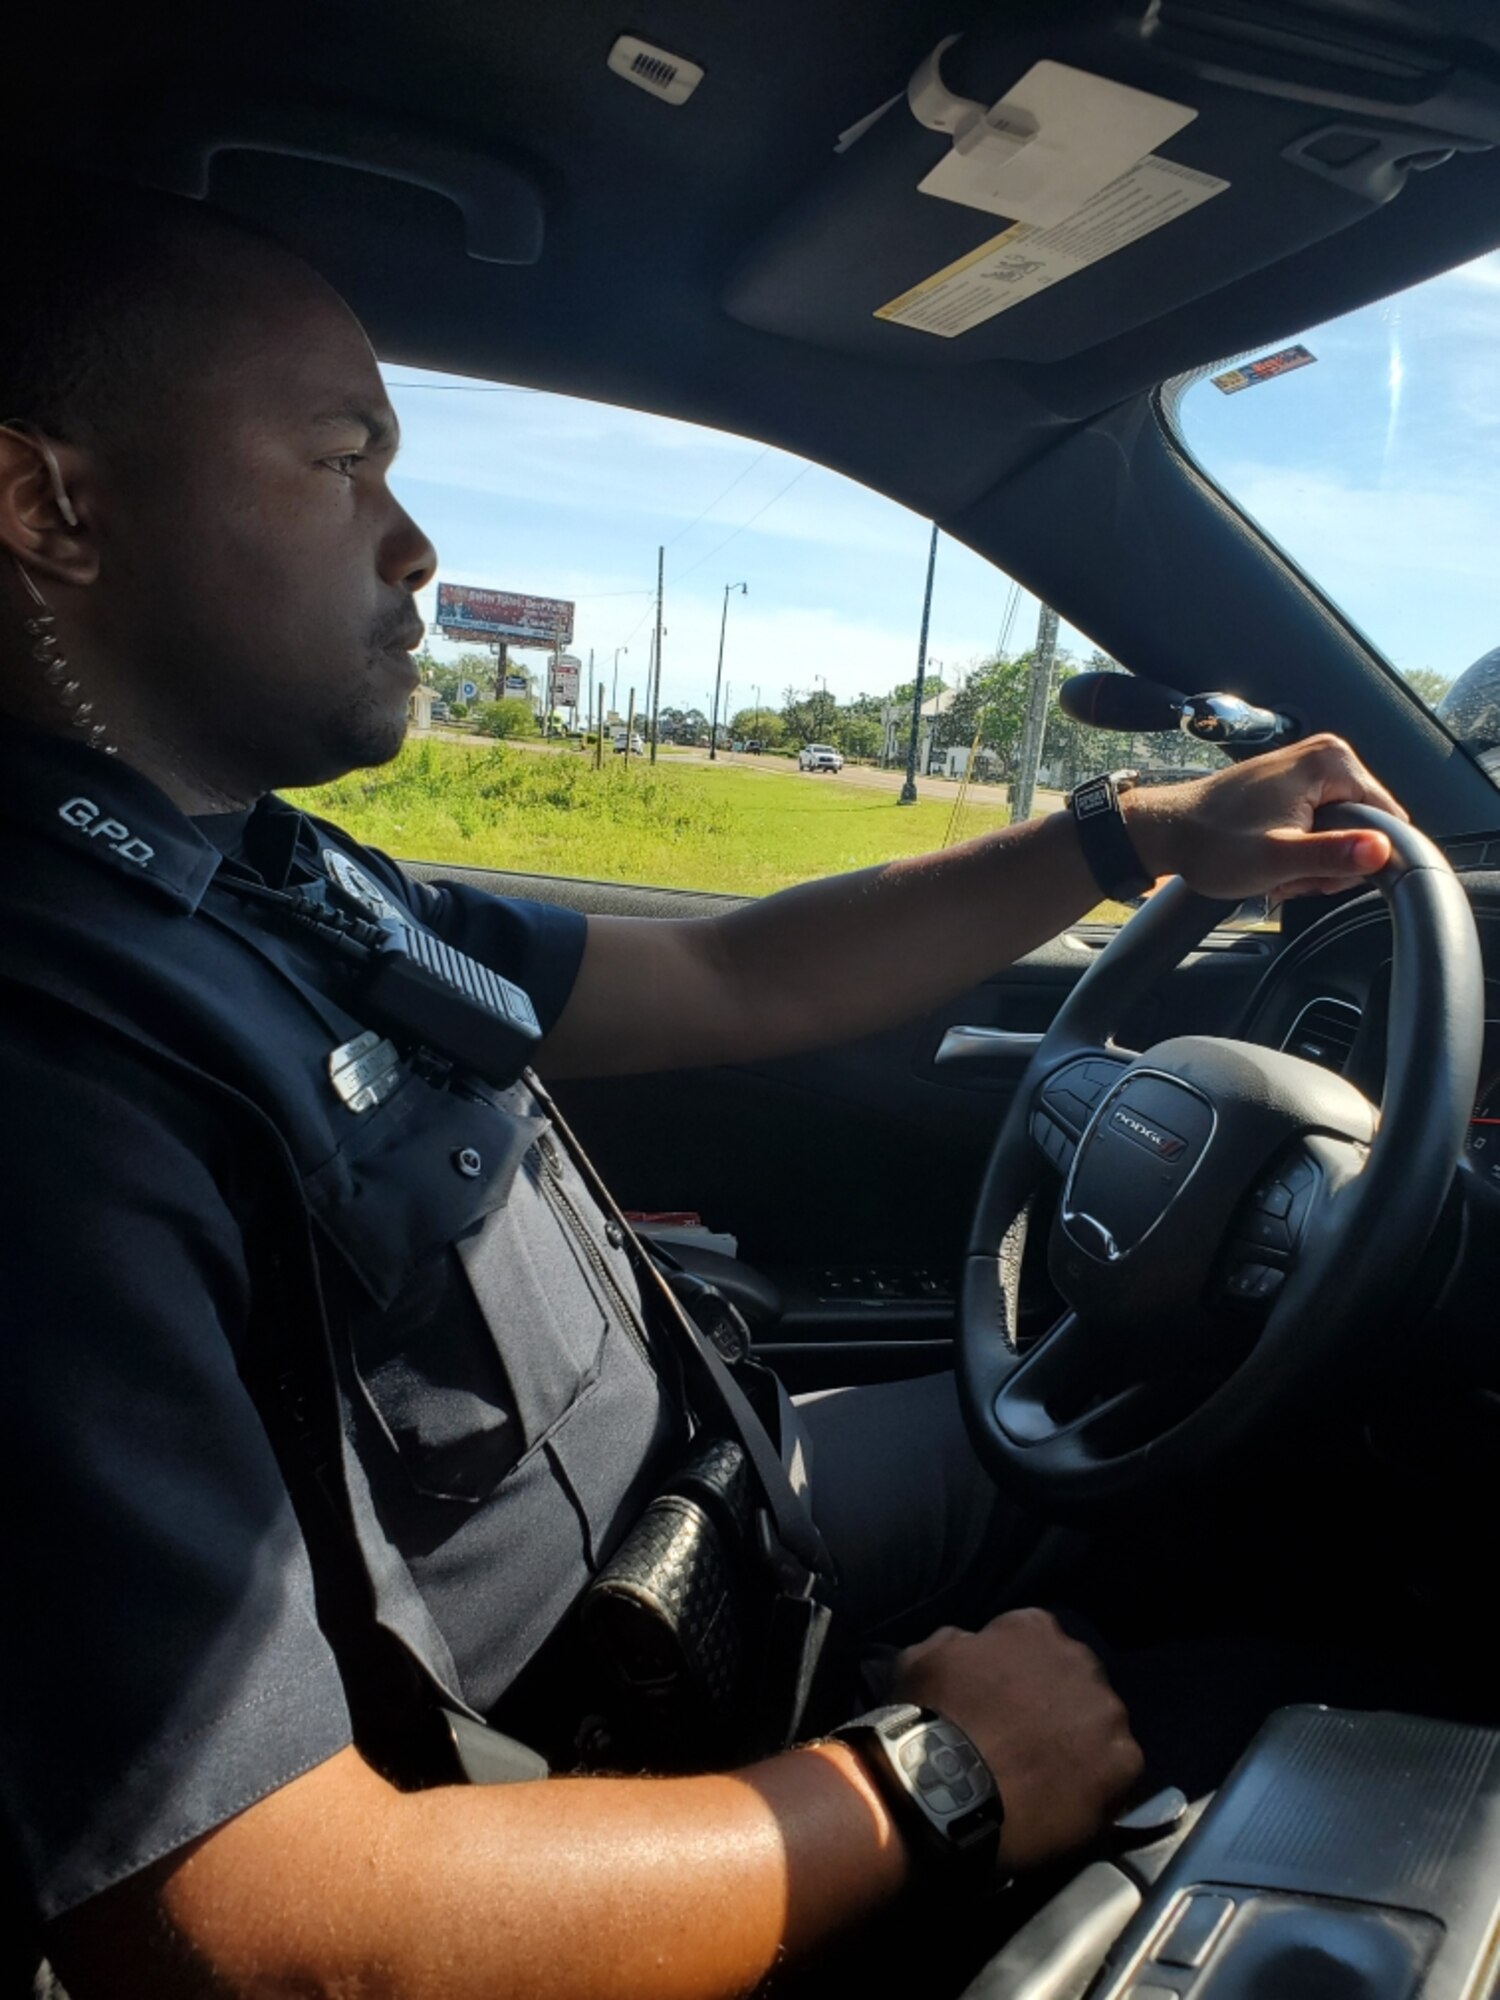 Gulfport Police Department patrol officer Derrick Tolbert works the road during the COVID-19 crisis, conducting traffic stops, answering calls for services and working accident scenes. Tolber, a technical sergeant, works as a combat arms instructor for the 403rd Security Forces Squadron of the 403rd Wing at Keesler Air Force Base, Miss. (courtesy photo)